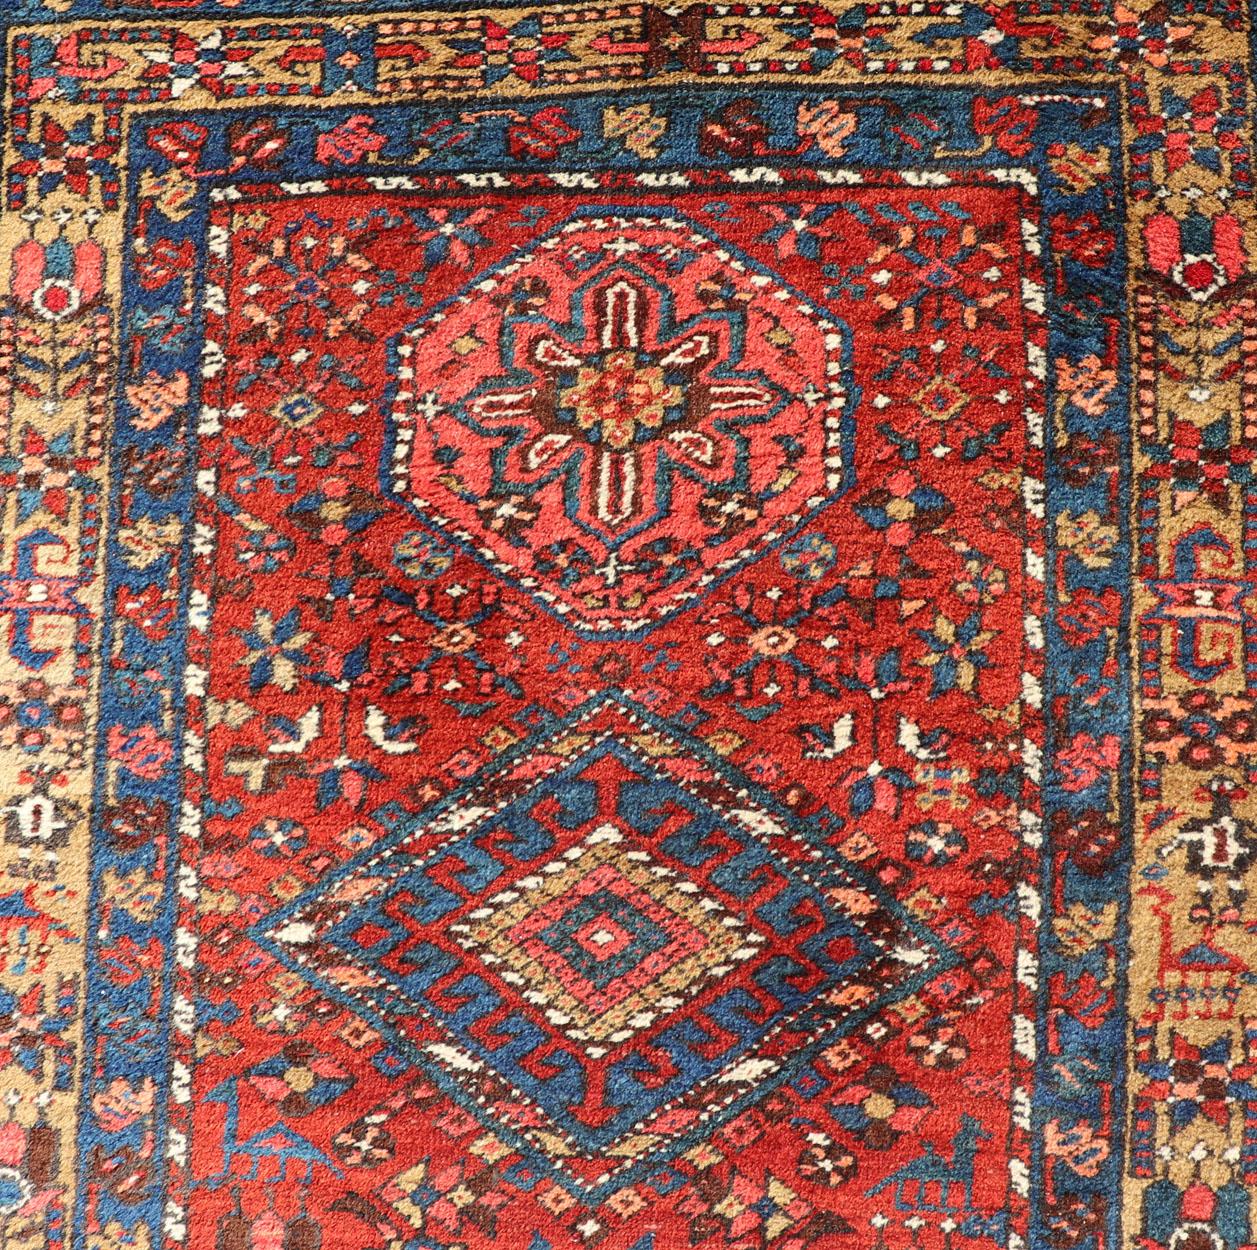 Antique Geometric Persian Long Heriz Runner in Red, Blue, Yellow, Teal, Orange For Sale 4